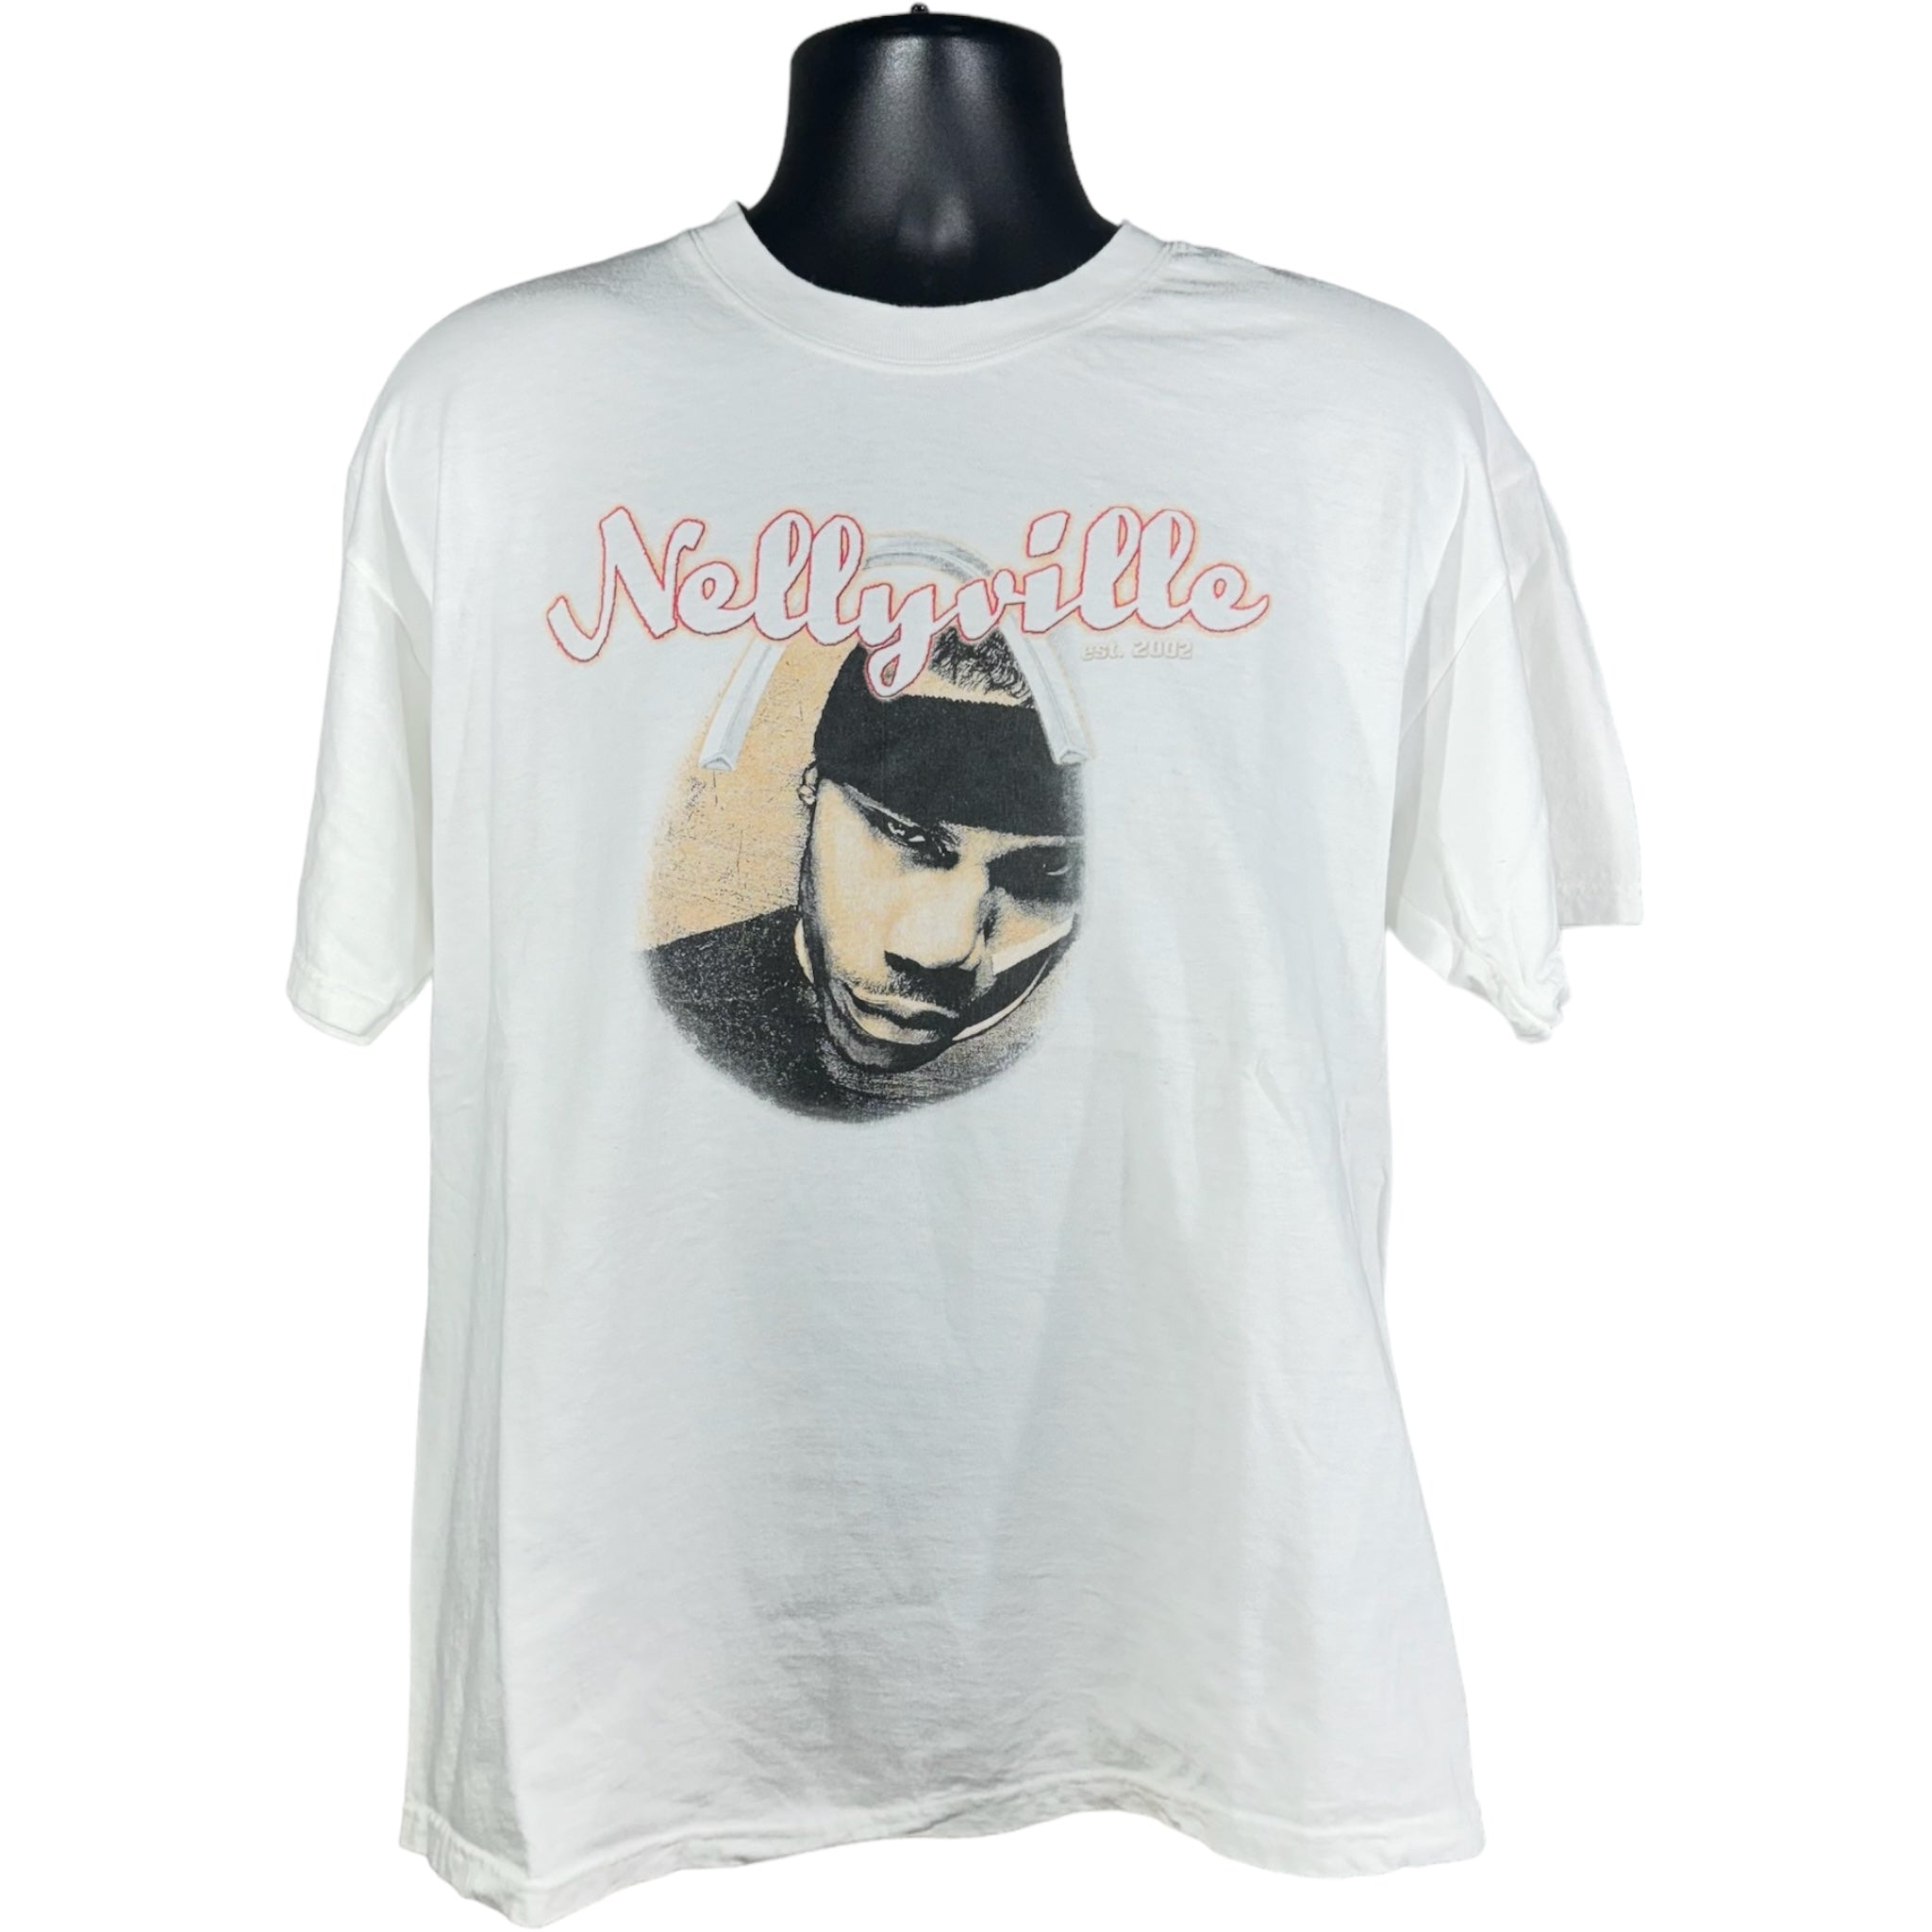 Vintage Nelly Nellyville Rap Tee